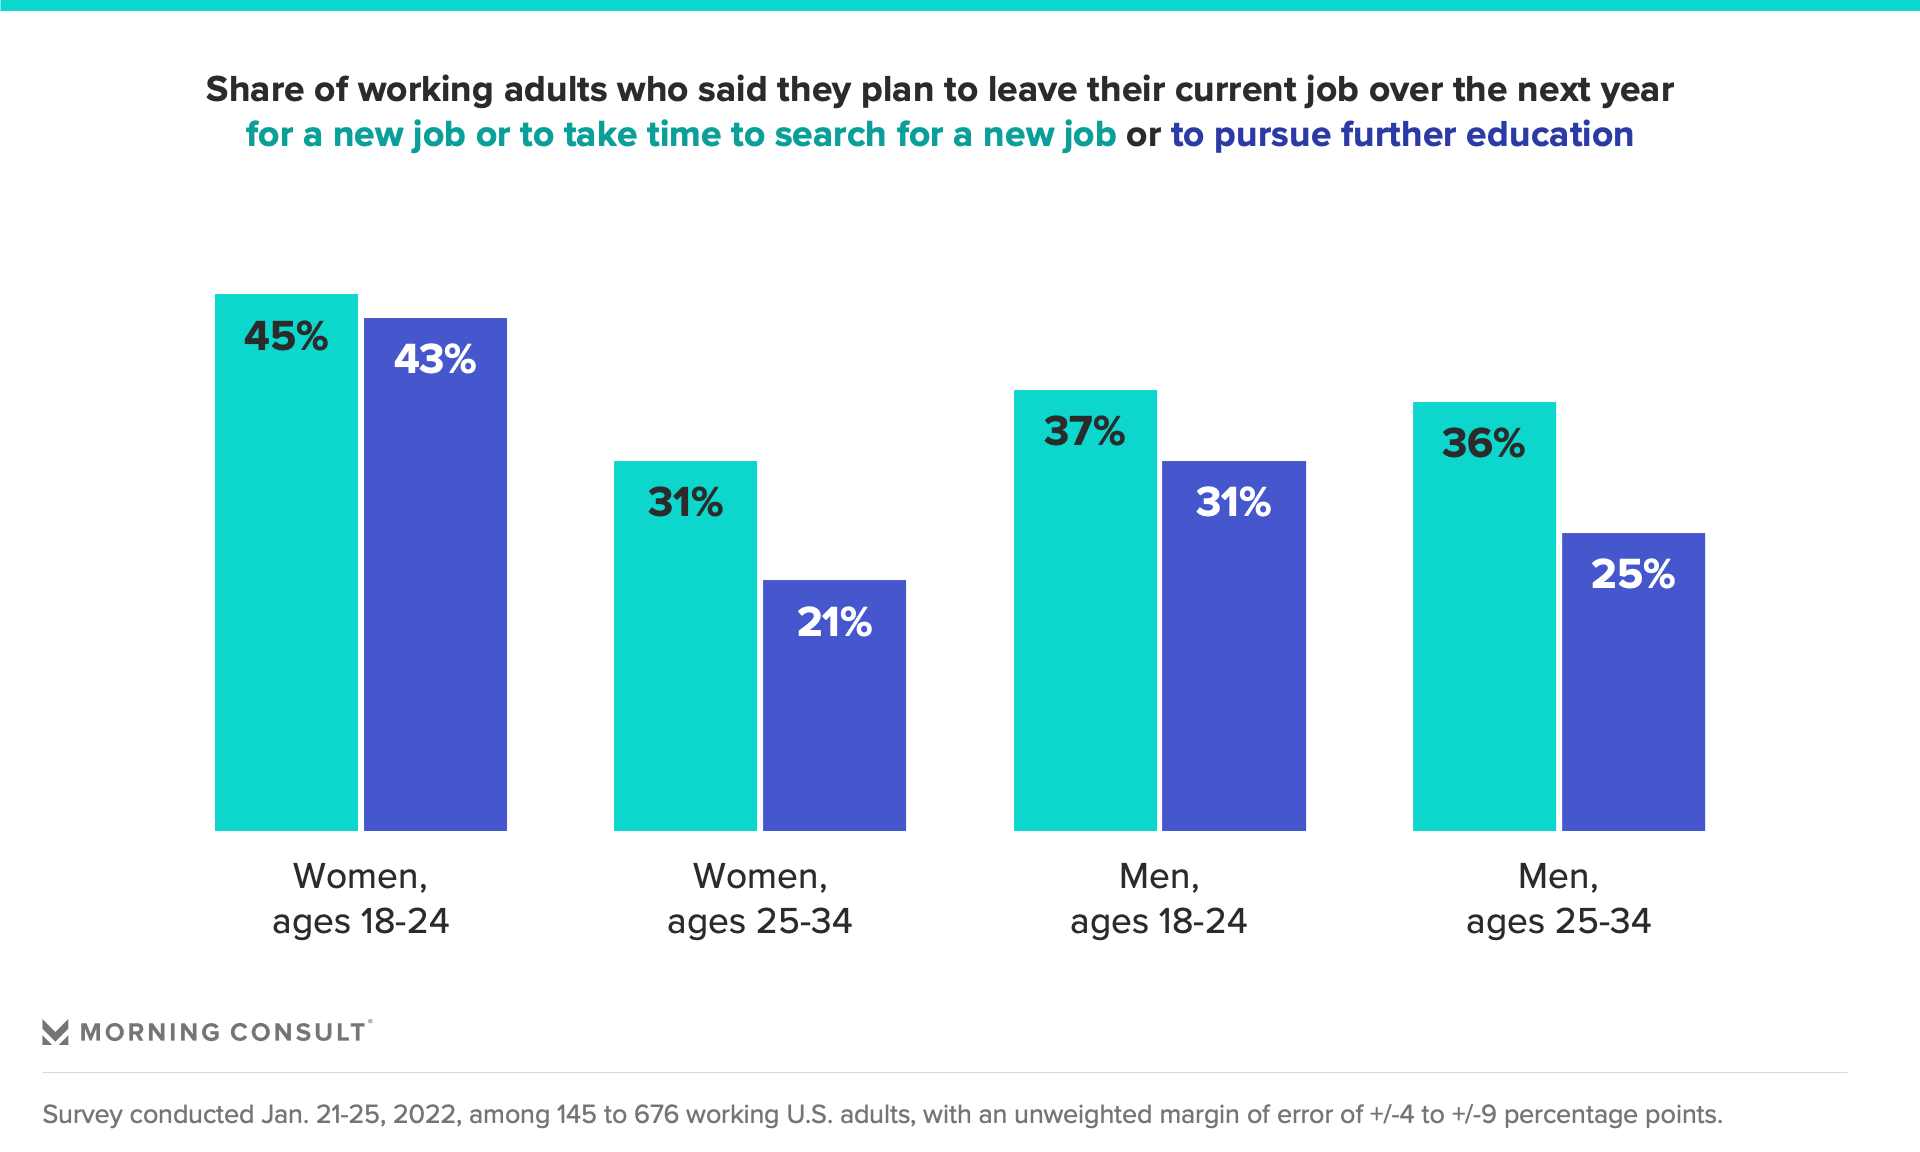 Chart depicting share of adults planning to leave their current job over the next year, by gender